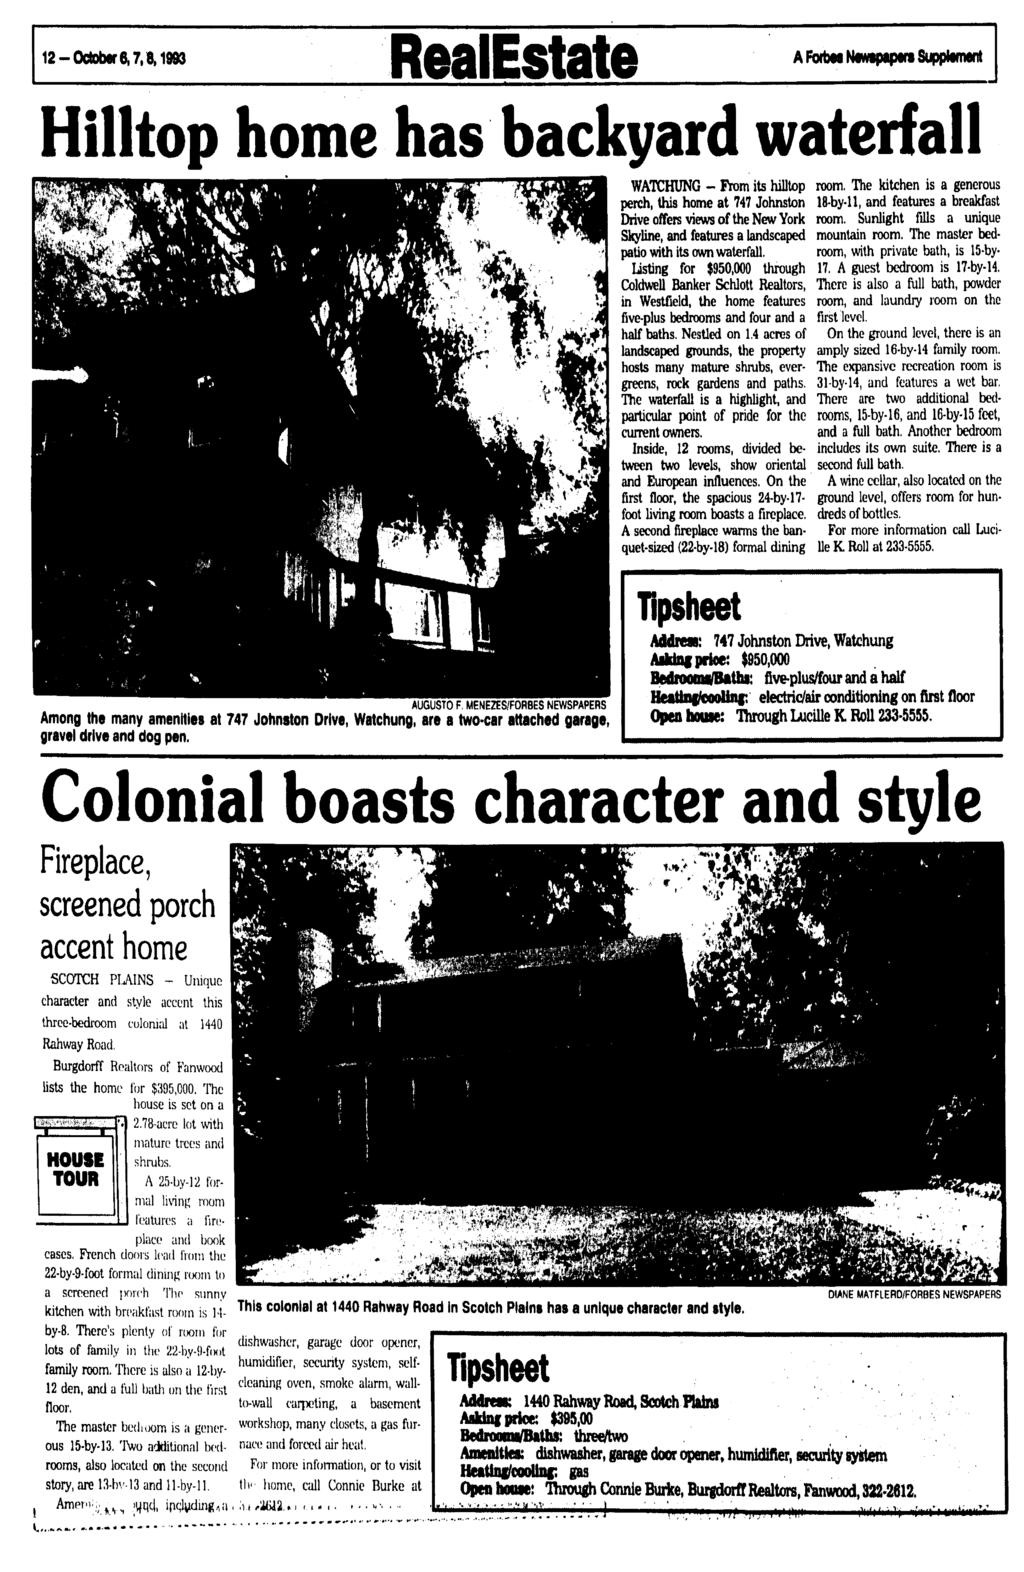 12 -October 6,7,6,1993 RealEstate A ForbM Newspapers Supplement Hilltop home has backyard waterfall WATCHUNG - From its hilltop perch, this home at 747 Johnston Drive offers views of the New York